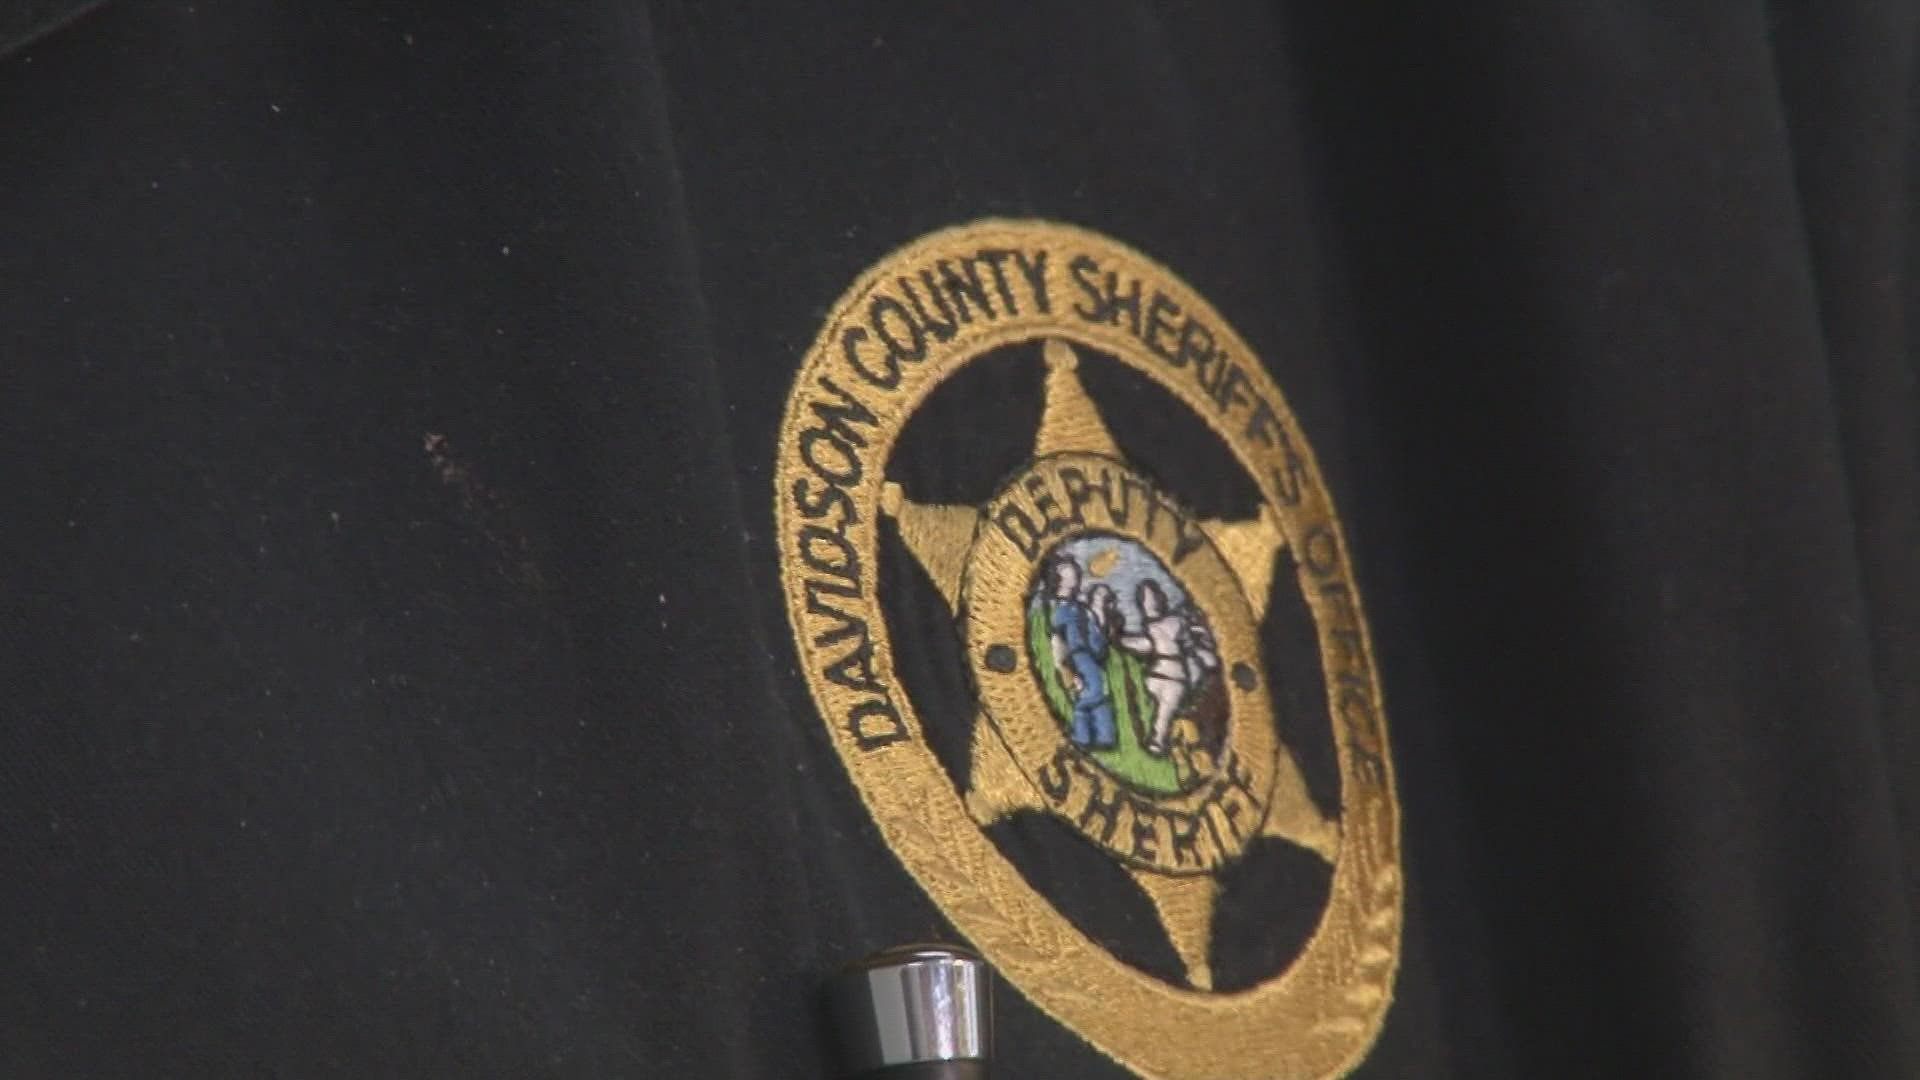 Seven new school resource officers will be placed across the district’s 18 elementary schools.